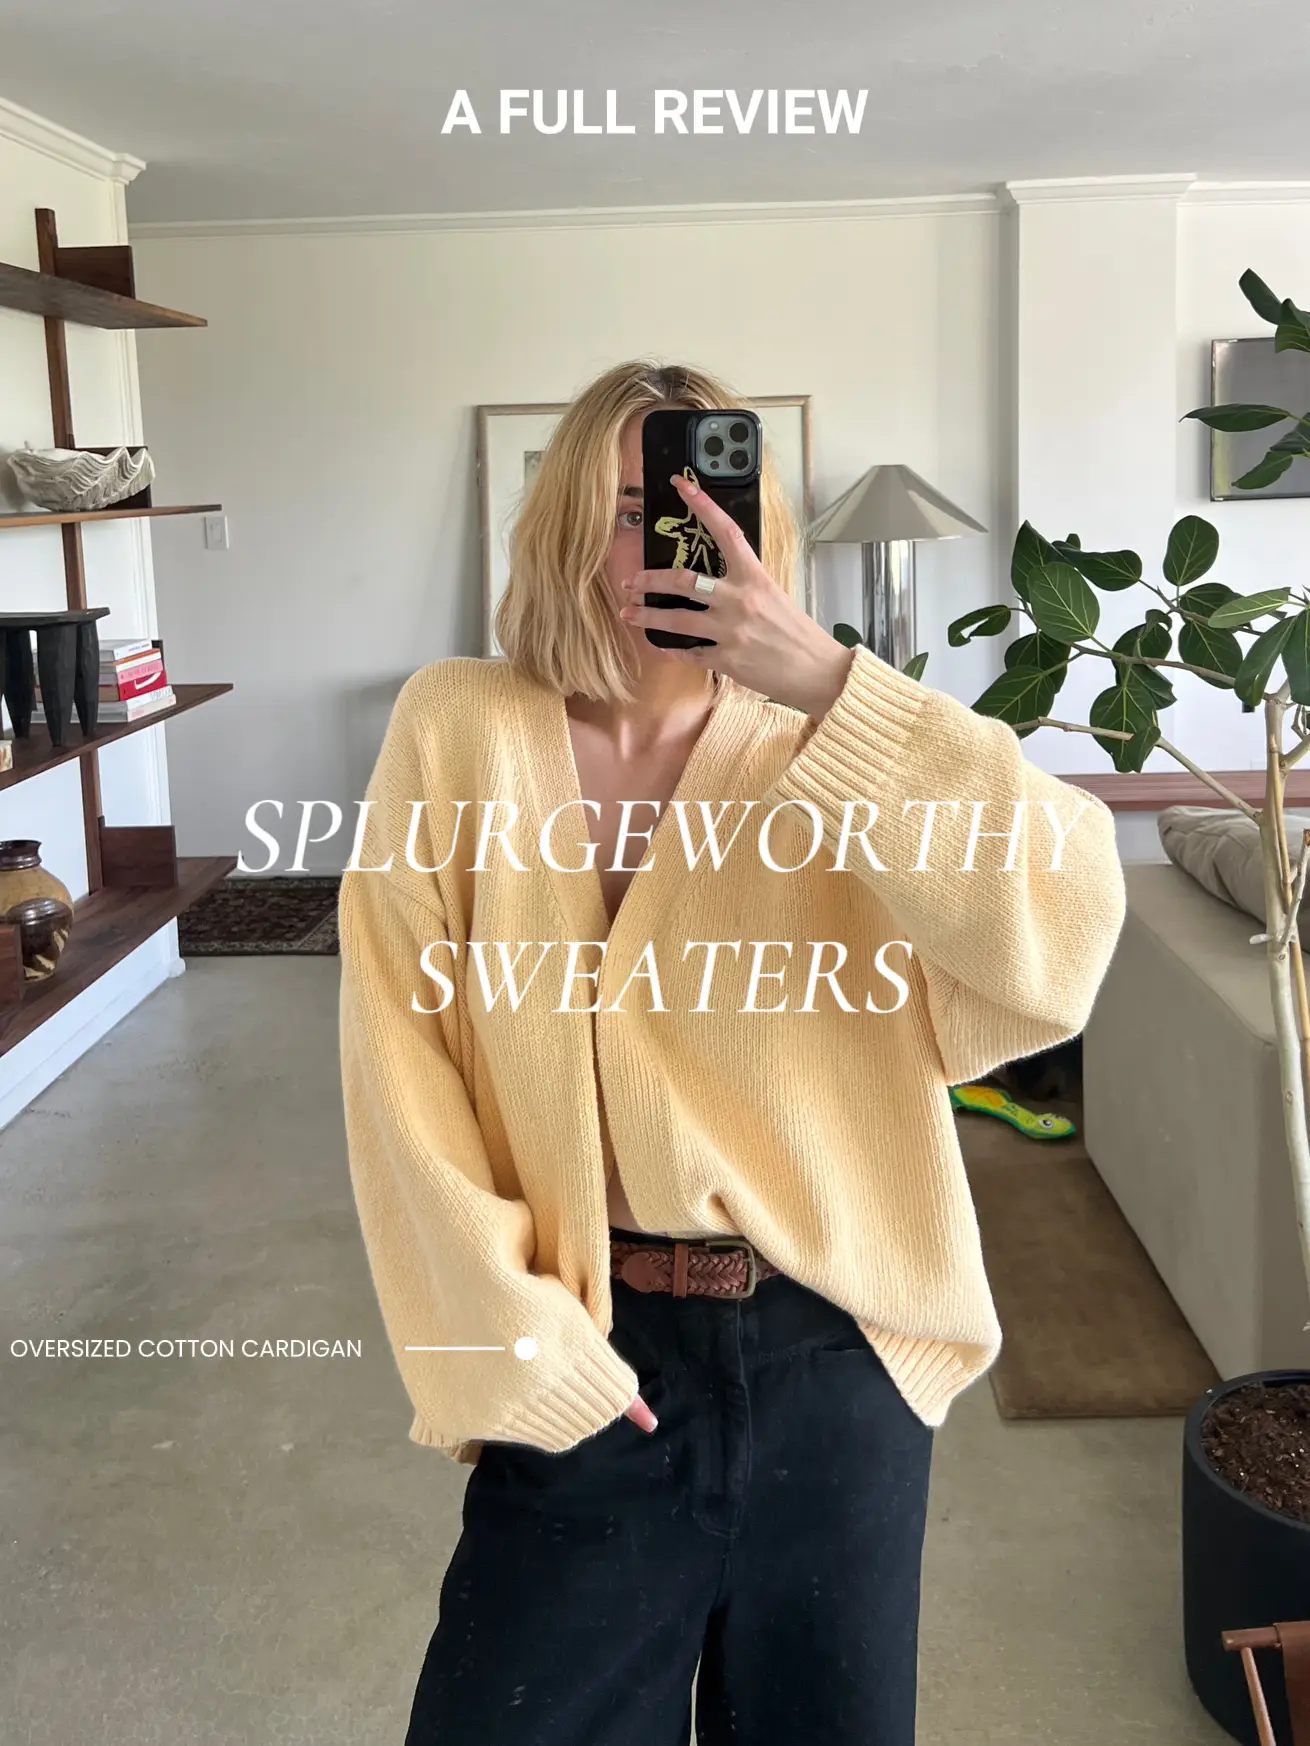 Designer Items that are Splurge Worthy for Christmas - Loverly Grey